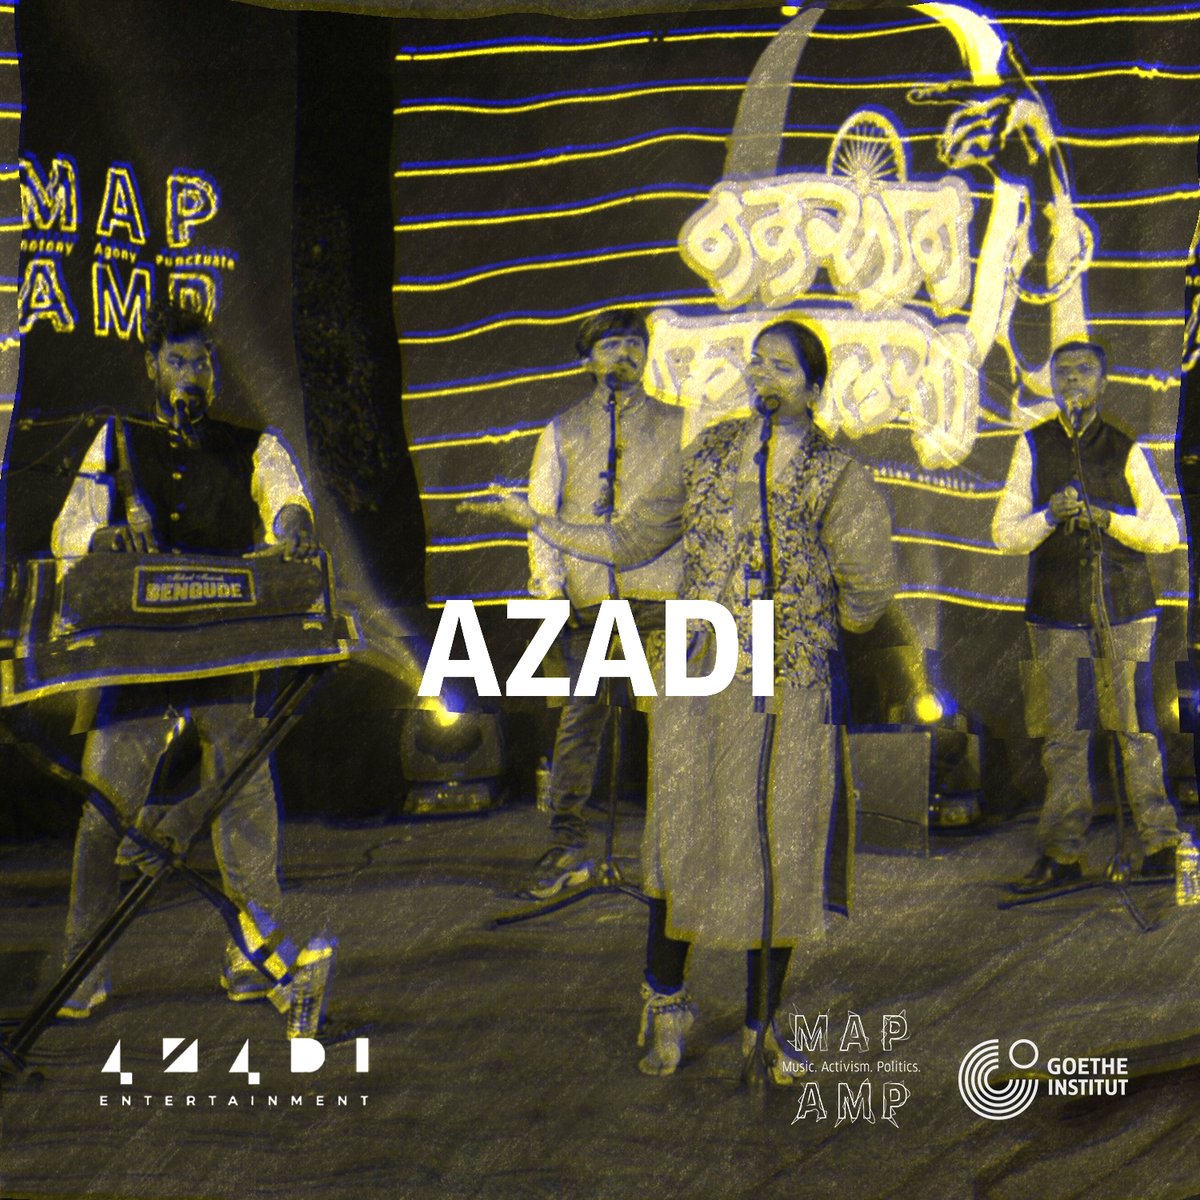 When we launched M.A.P // A.M.P, we teamed up with the good folks at Azadi to curate virtual performances with their artists that were then live-streamed on YouTube.

Click the link to discover.
youtube.com/playlist?list=…
.
.
.
.
#ProtestMusic #ActivistMusic #GIMMB #MAPAMP